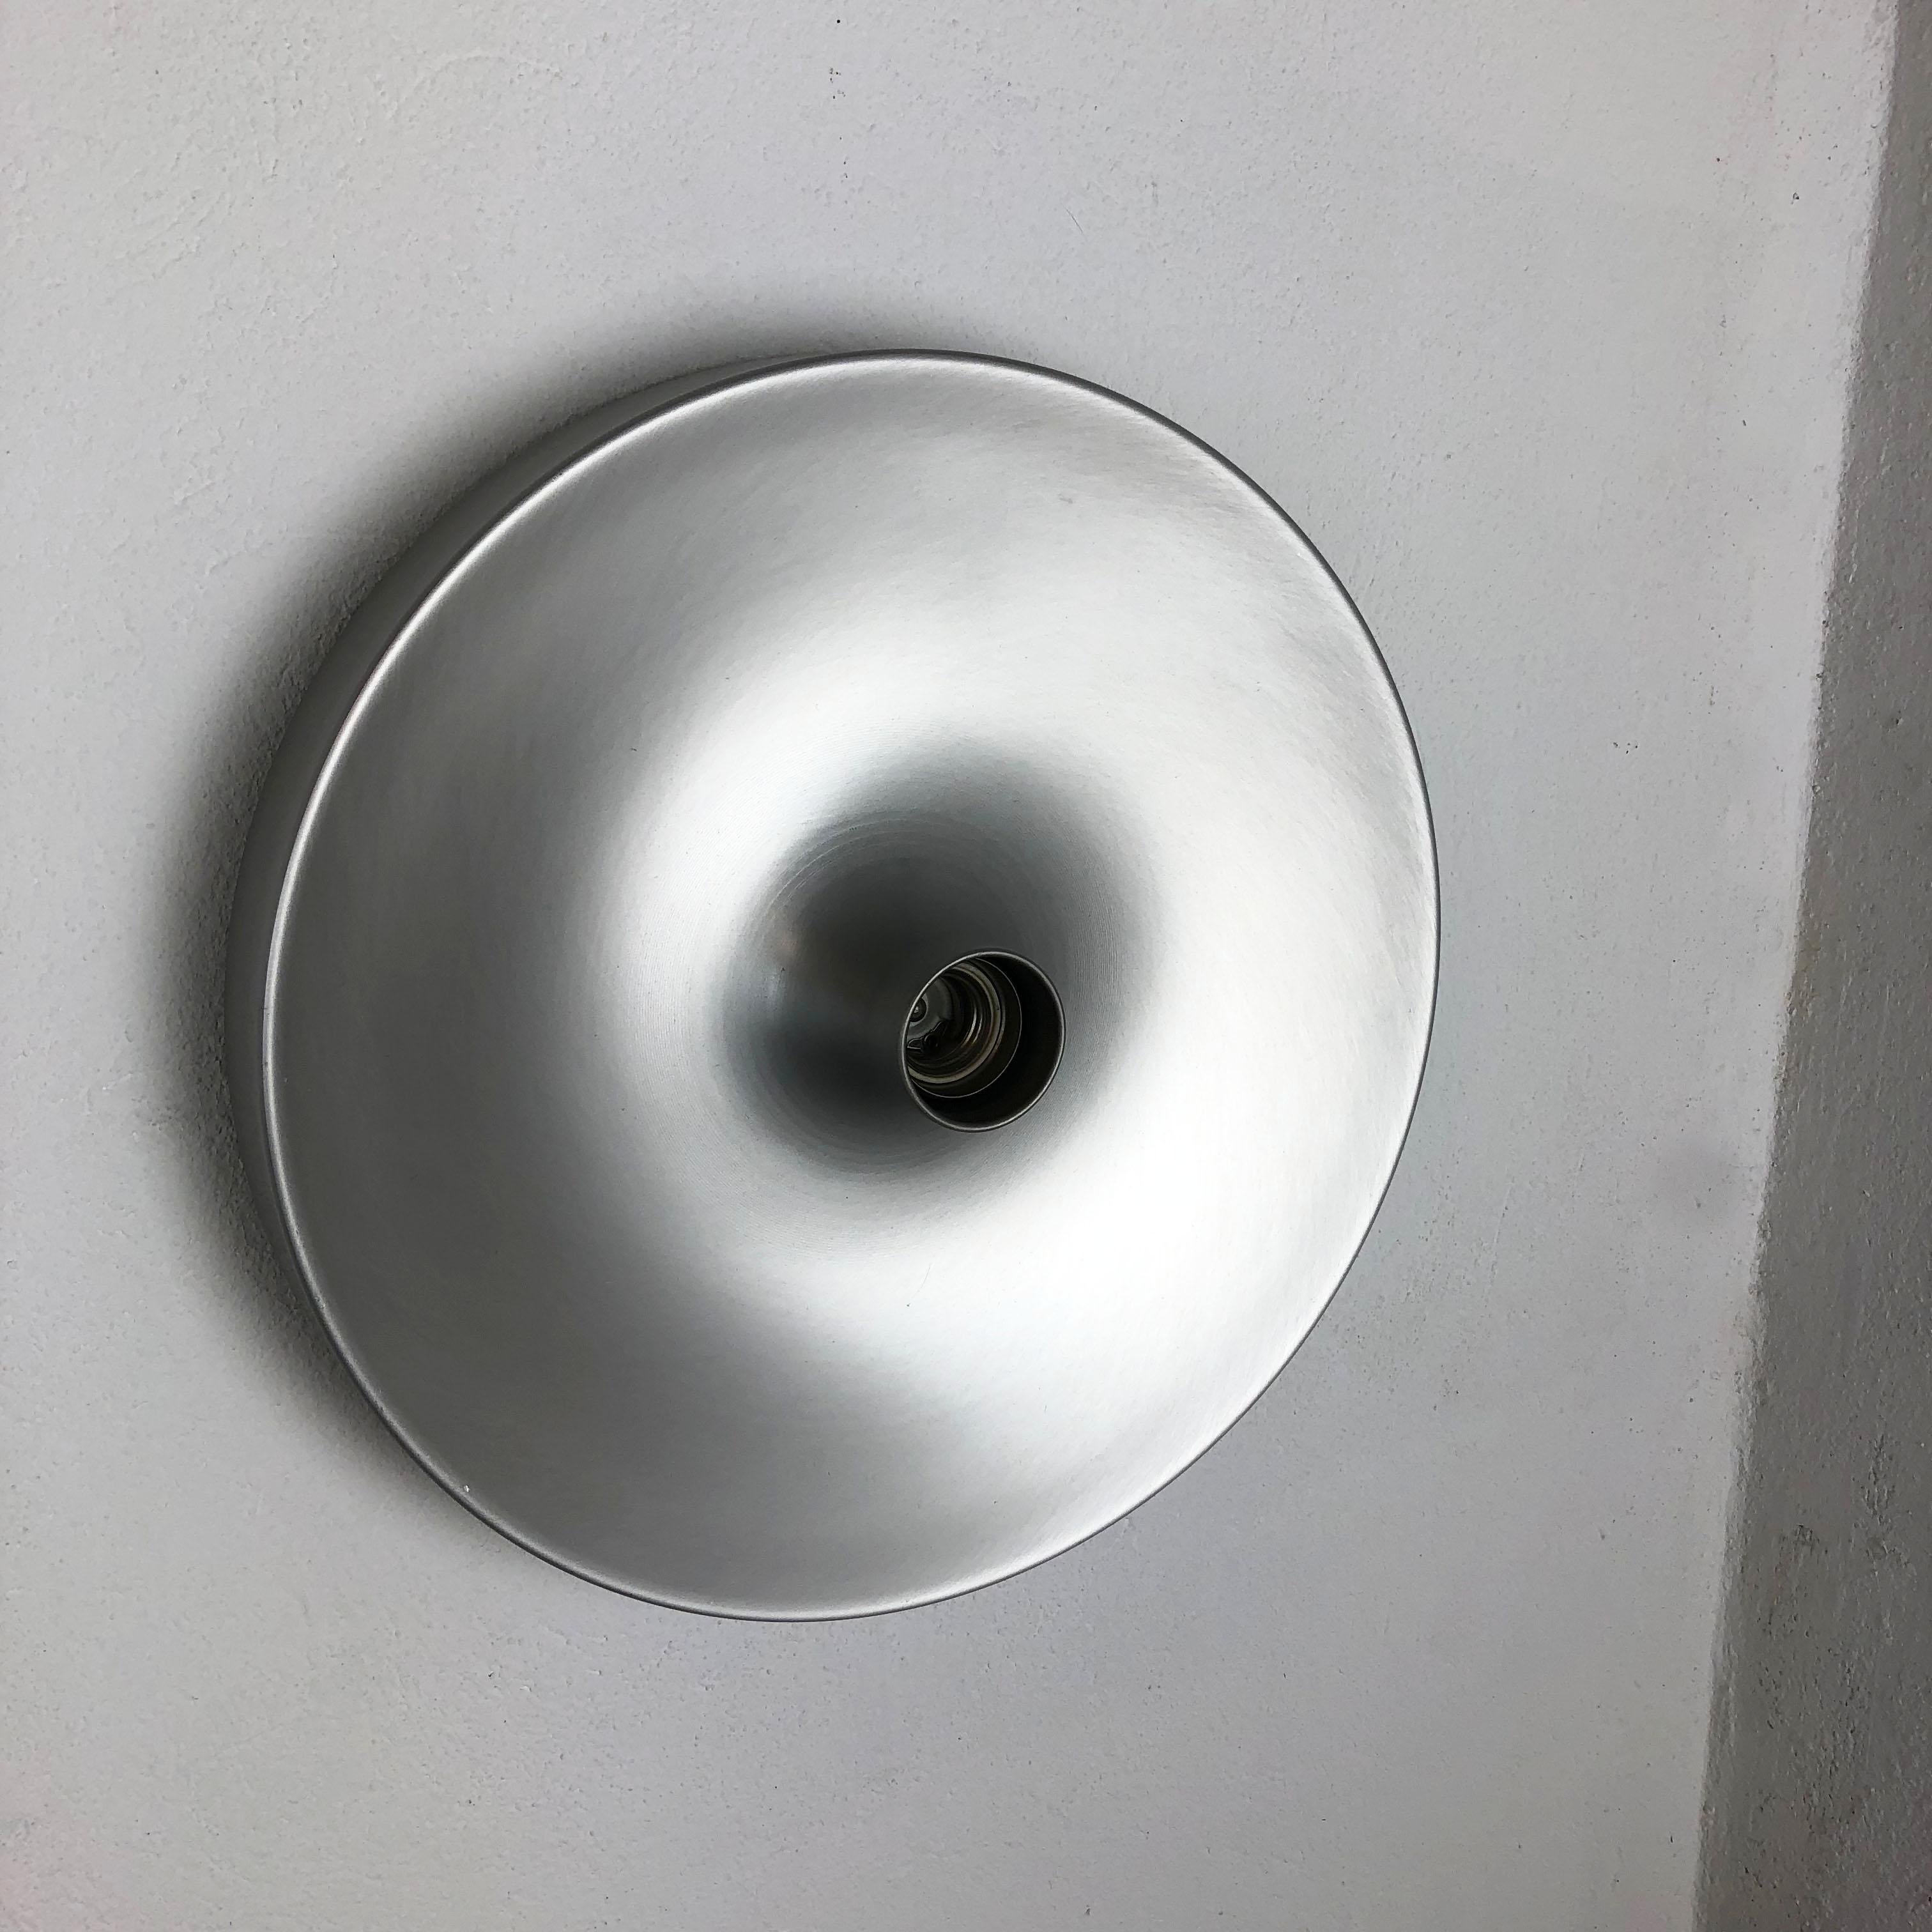 Article:

Wall light sconce


Producer:

Staff lights



Origin:

Germany



Age:

1970s




Original 1960s modernist German wall light made of solid metal. This super rare wall light was produced in the 1960s by Staff